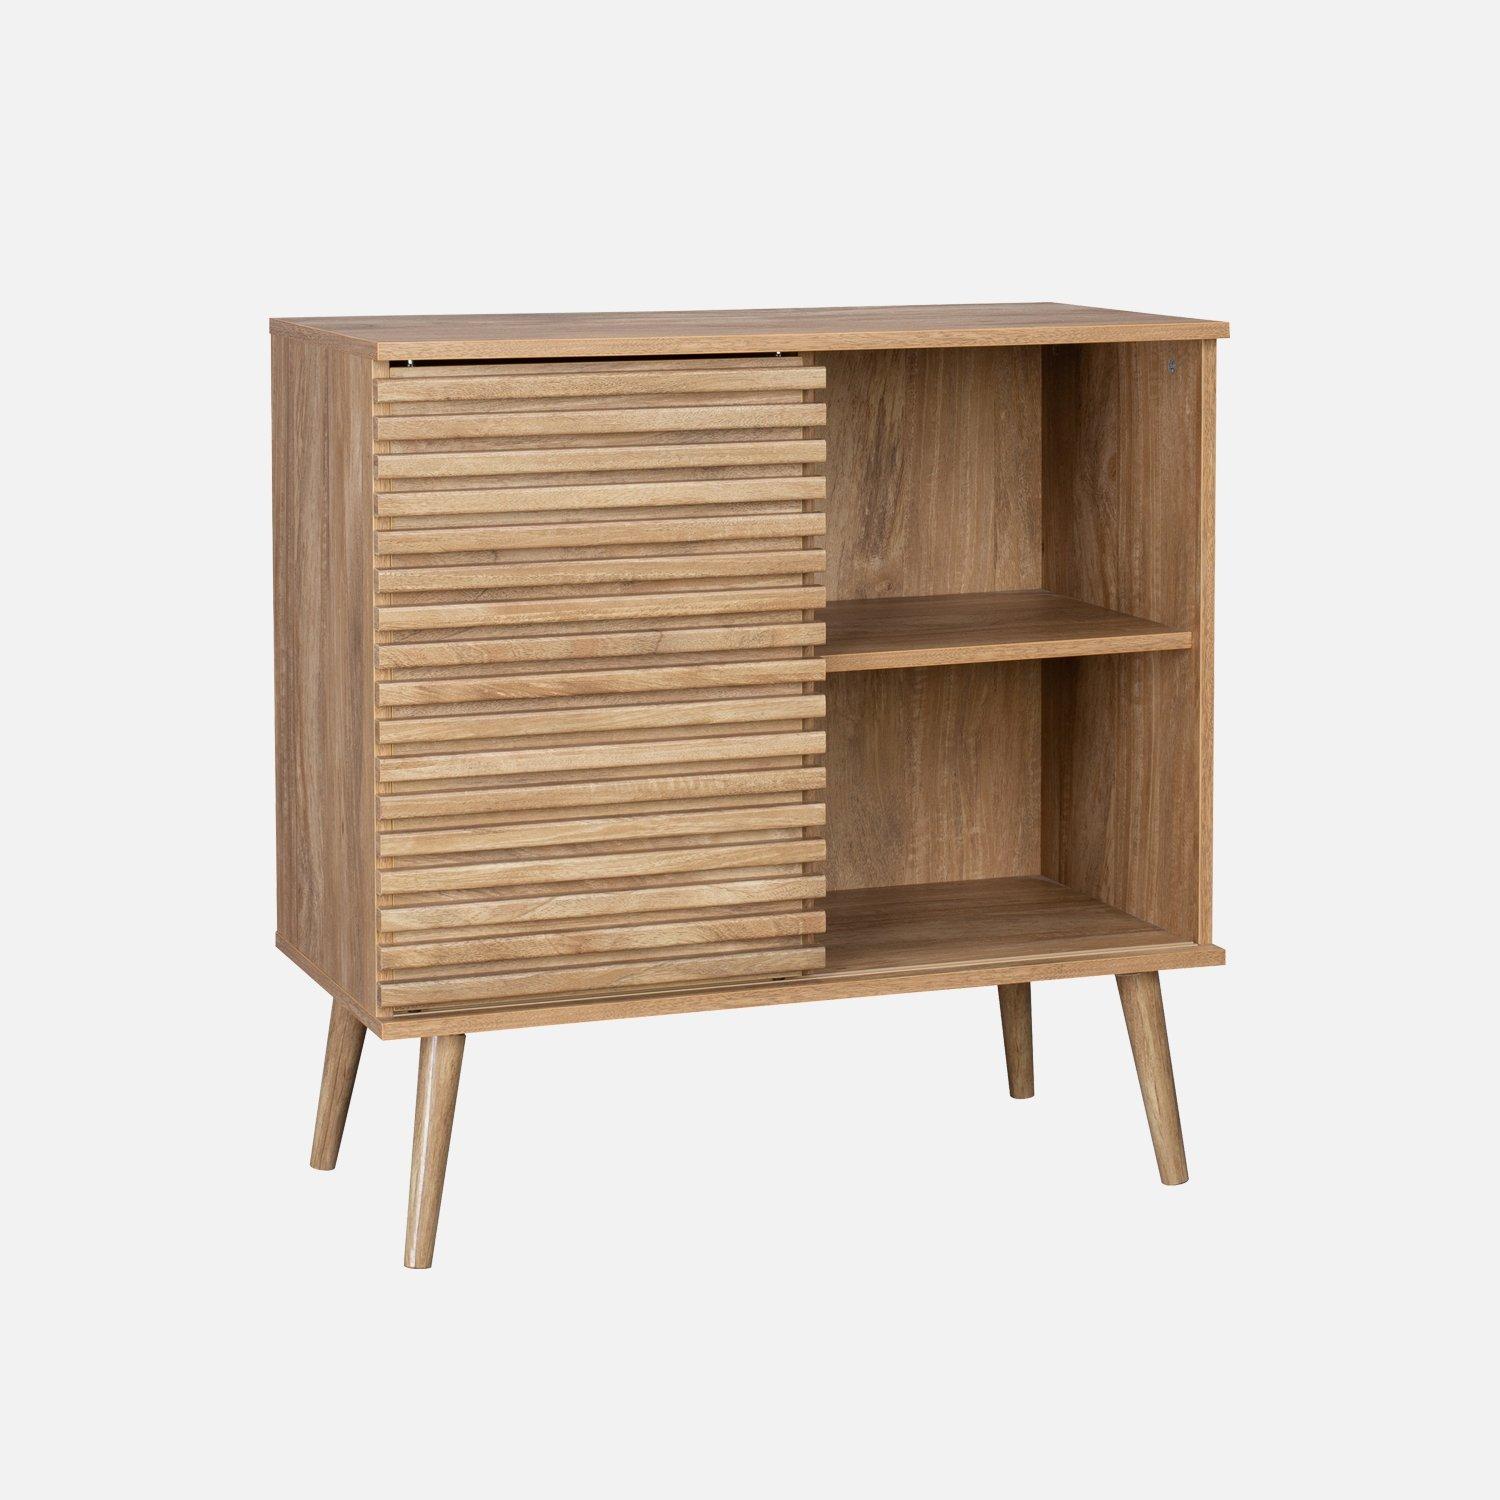 Scandinavian Sideboard With Wood Decor And Grooved Sliding Door L 80